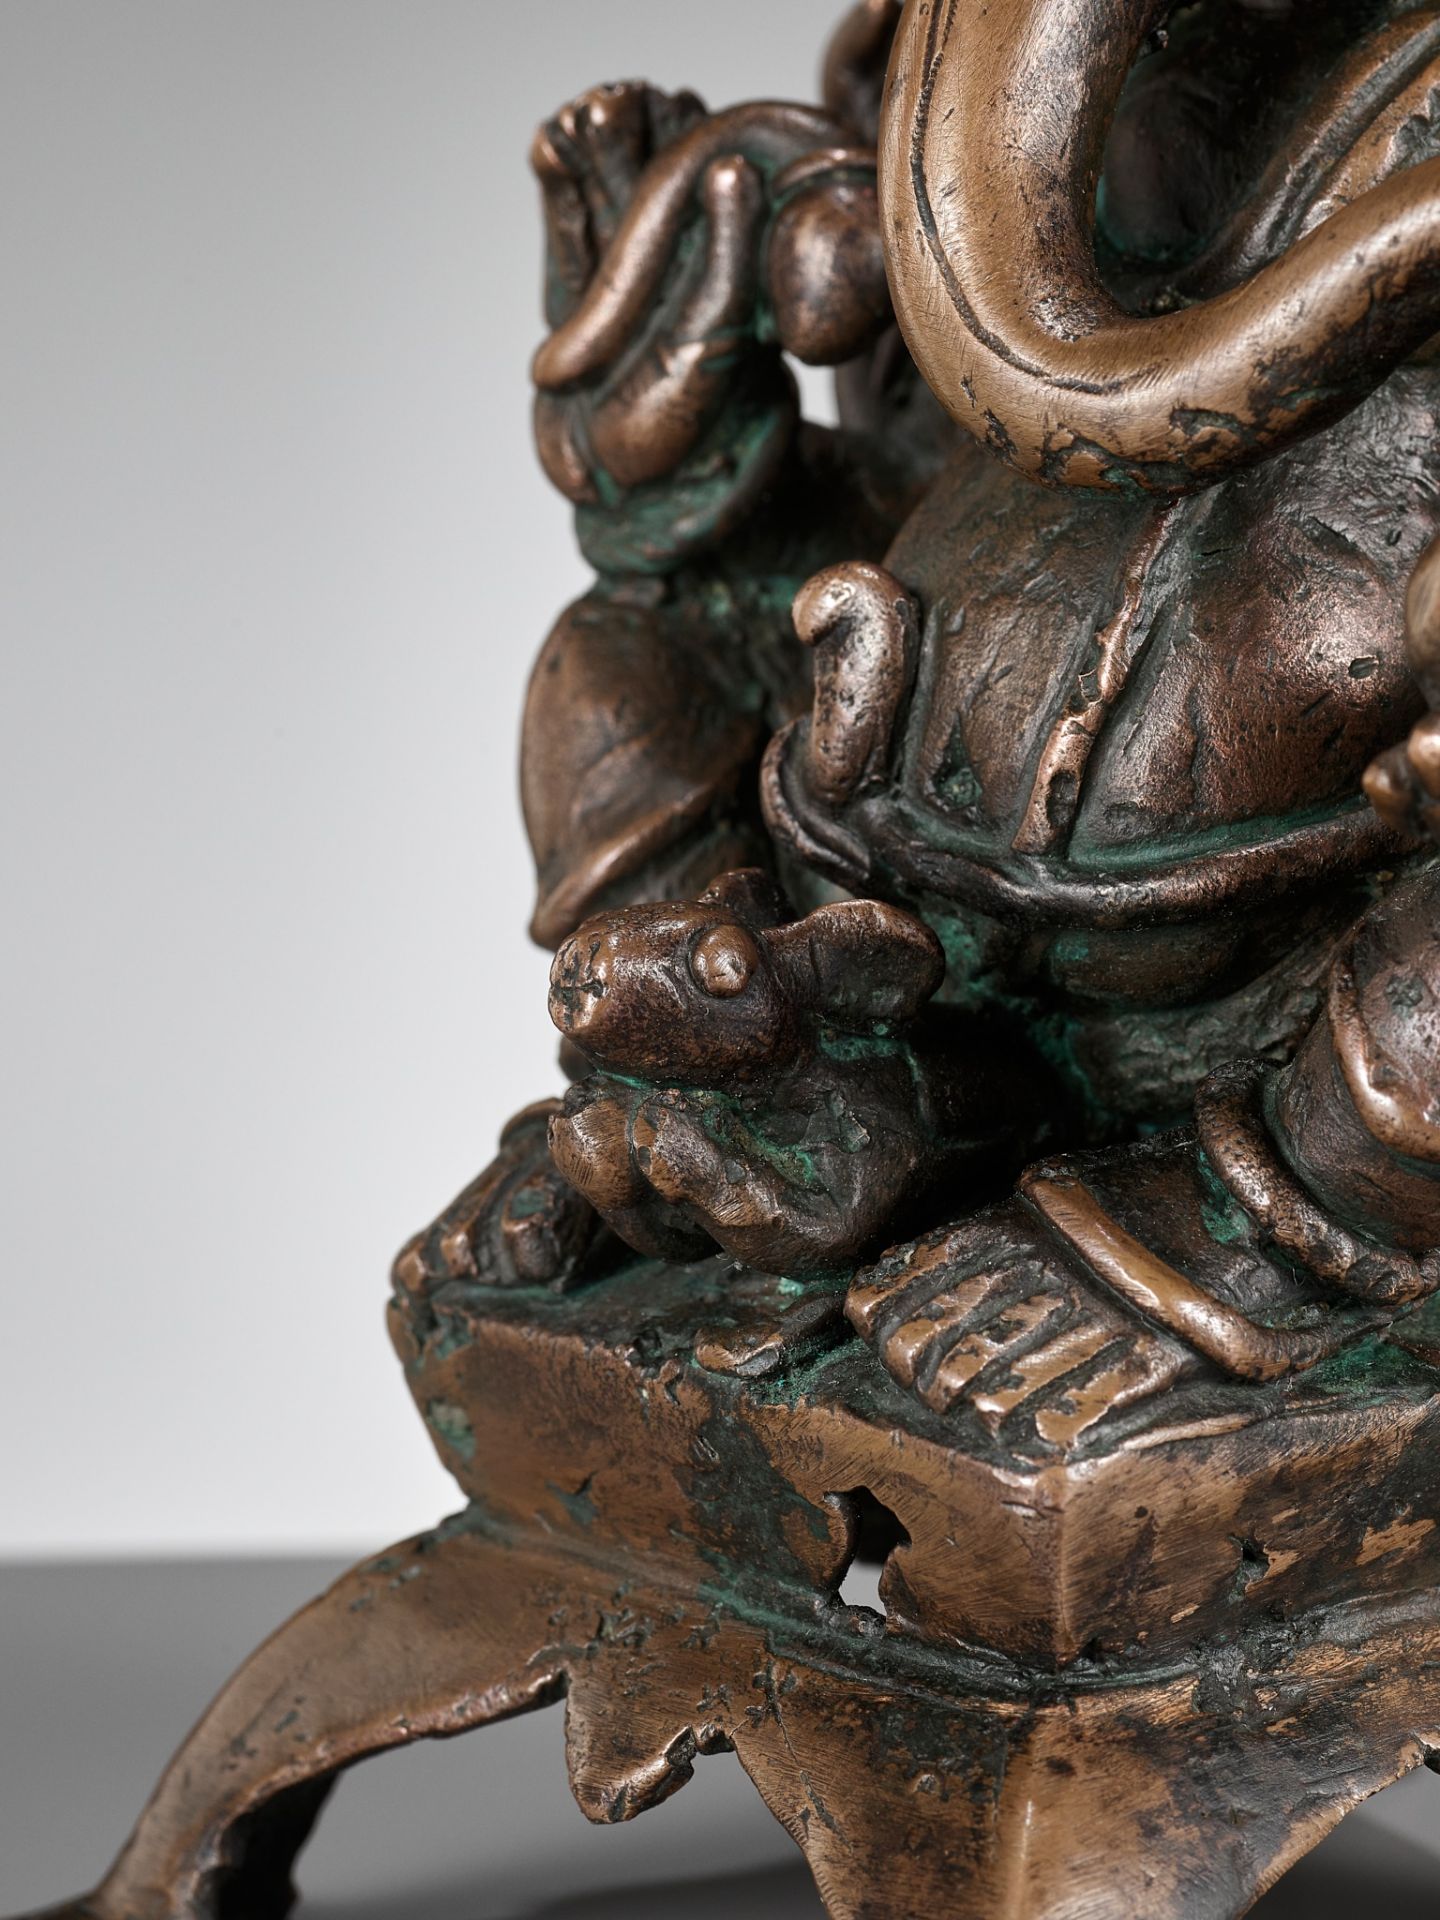 A SILVER-INLAID COPPER ALLOY FIGURE OF GANESHA, SOUTH INDIA, C. 1650-1750 - Image 3 of 12